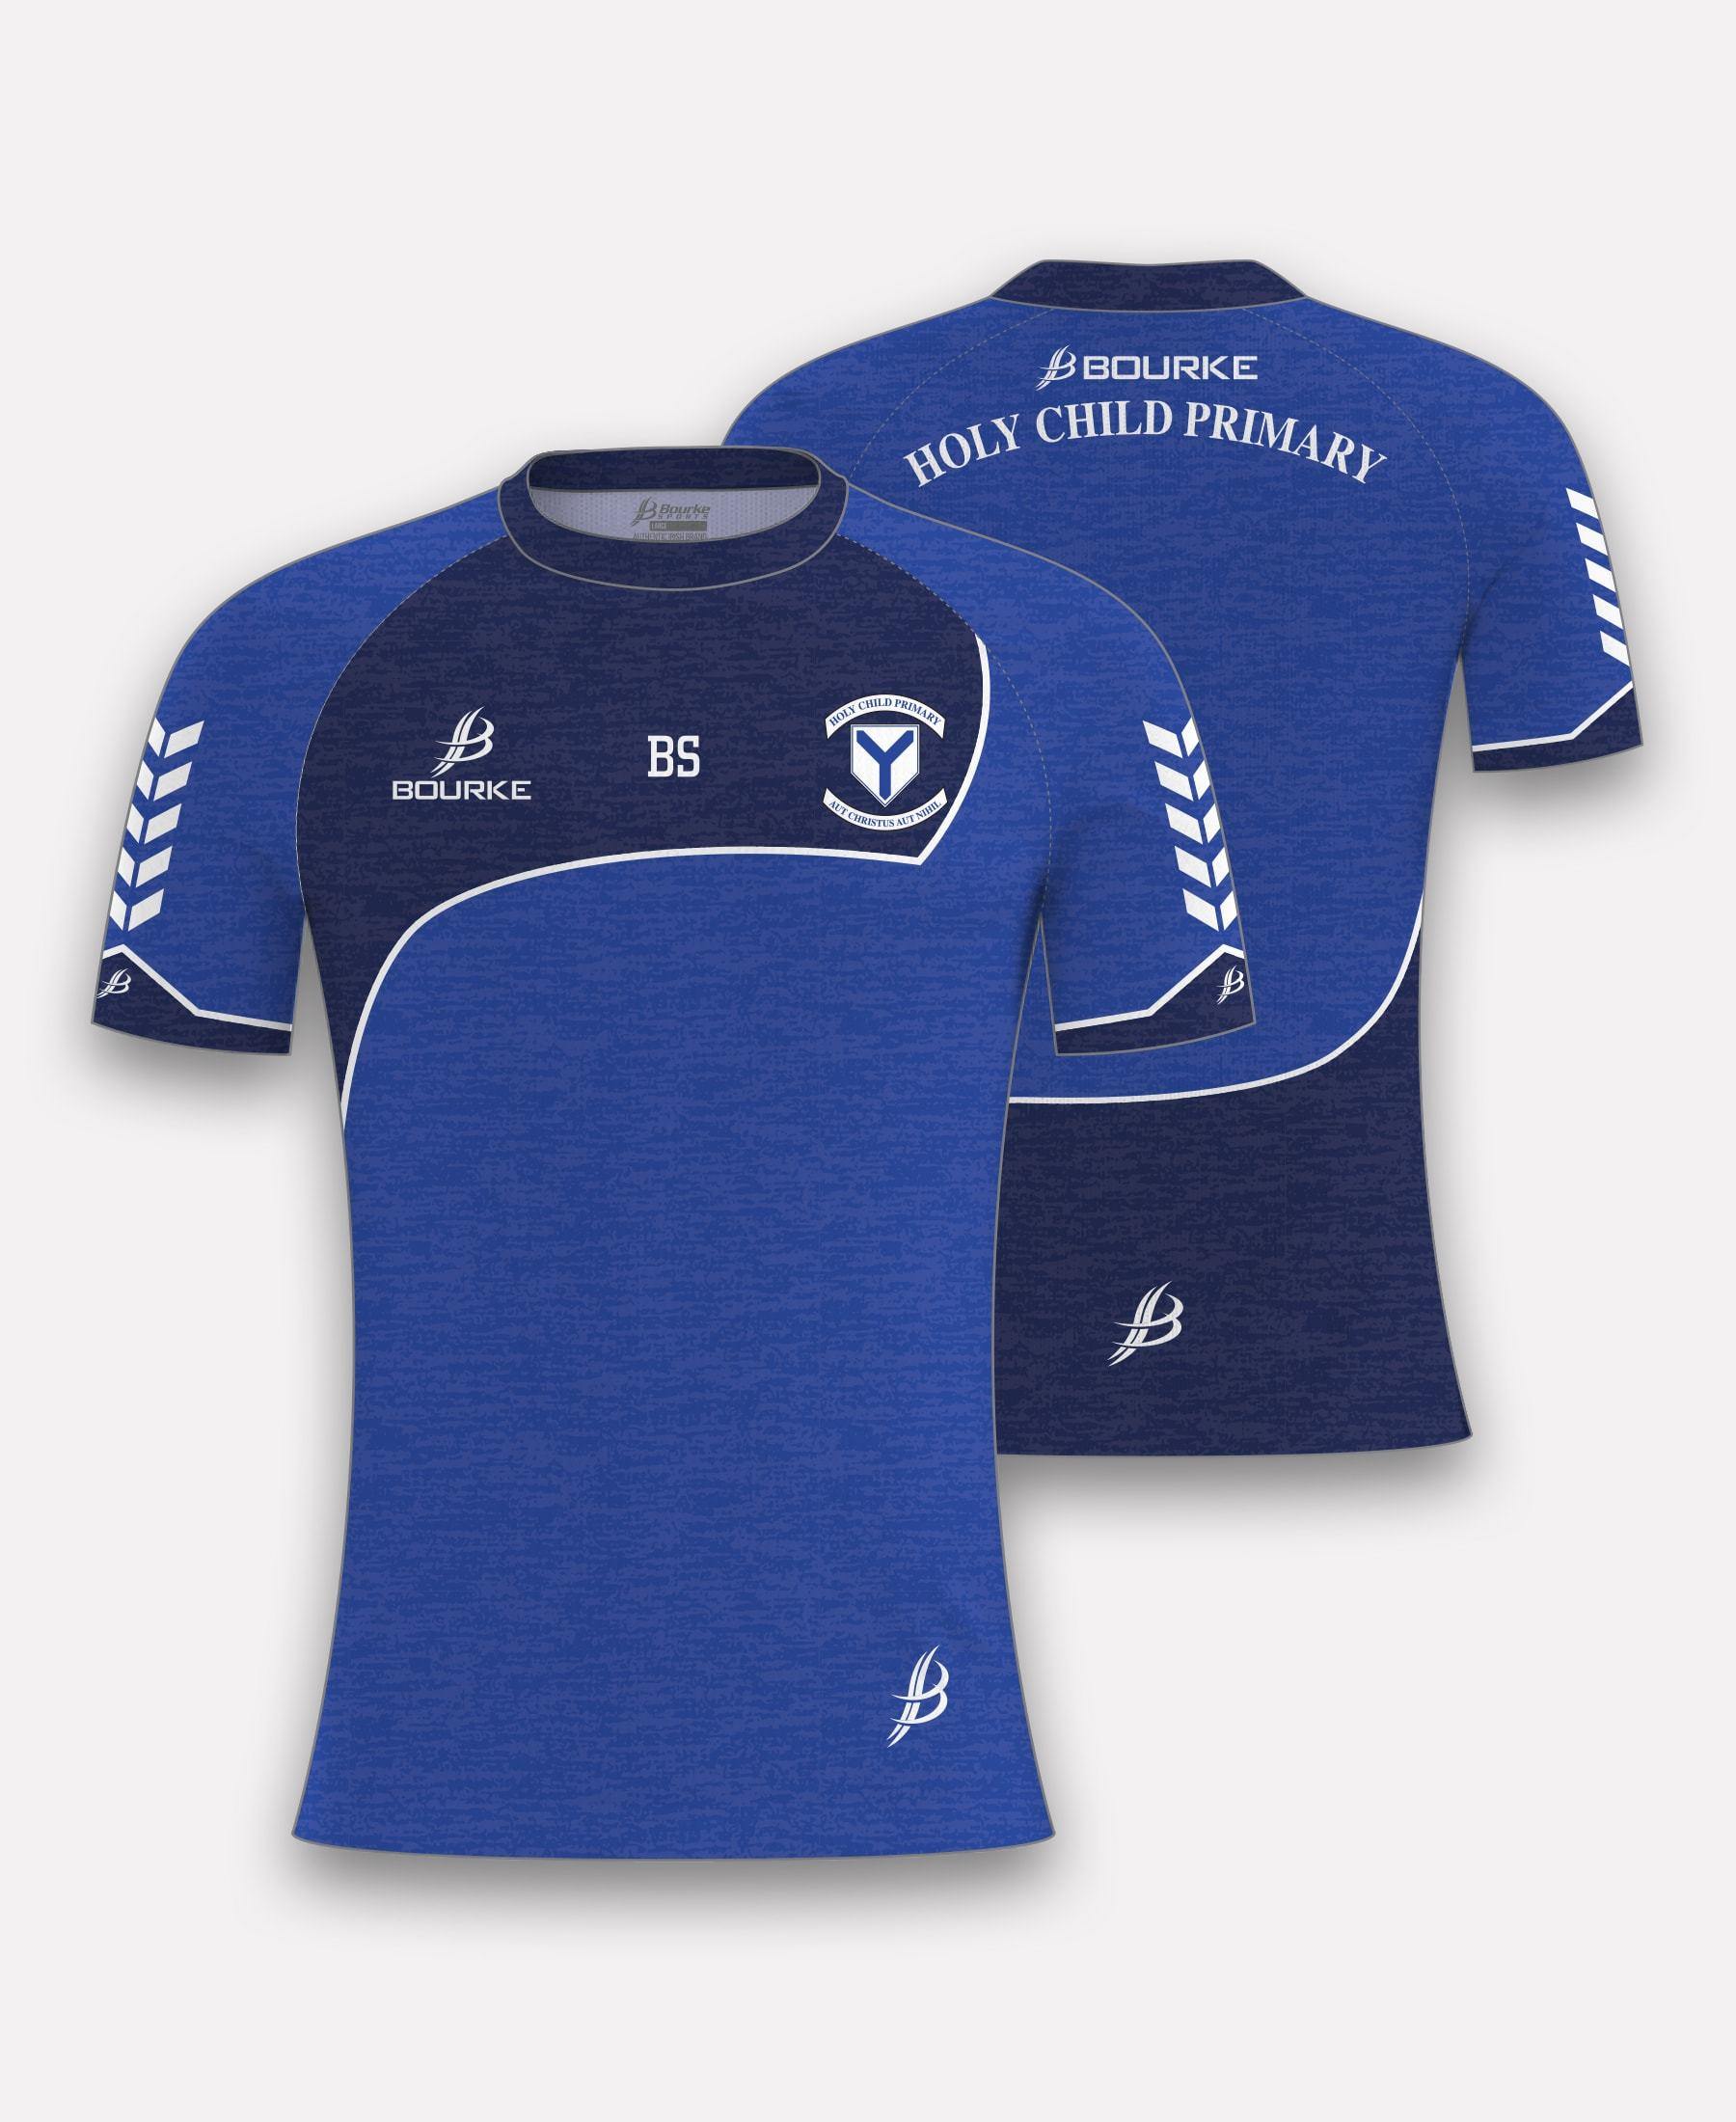 Holy Child Primary School Jersey - Bourke Sports Limited